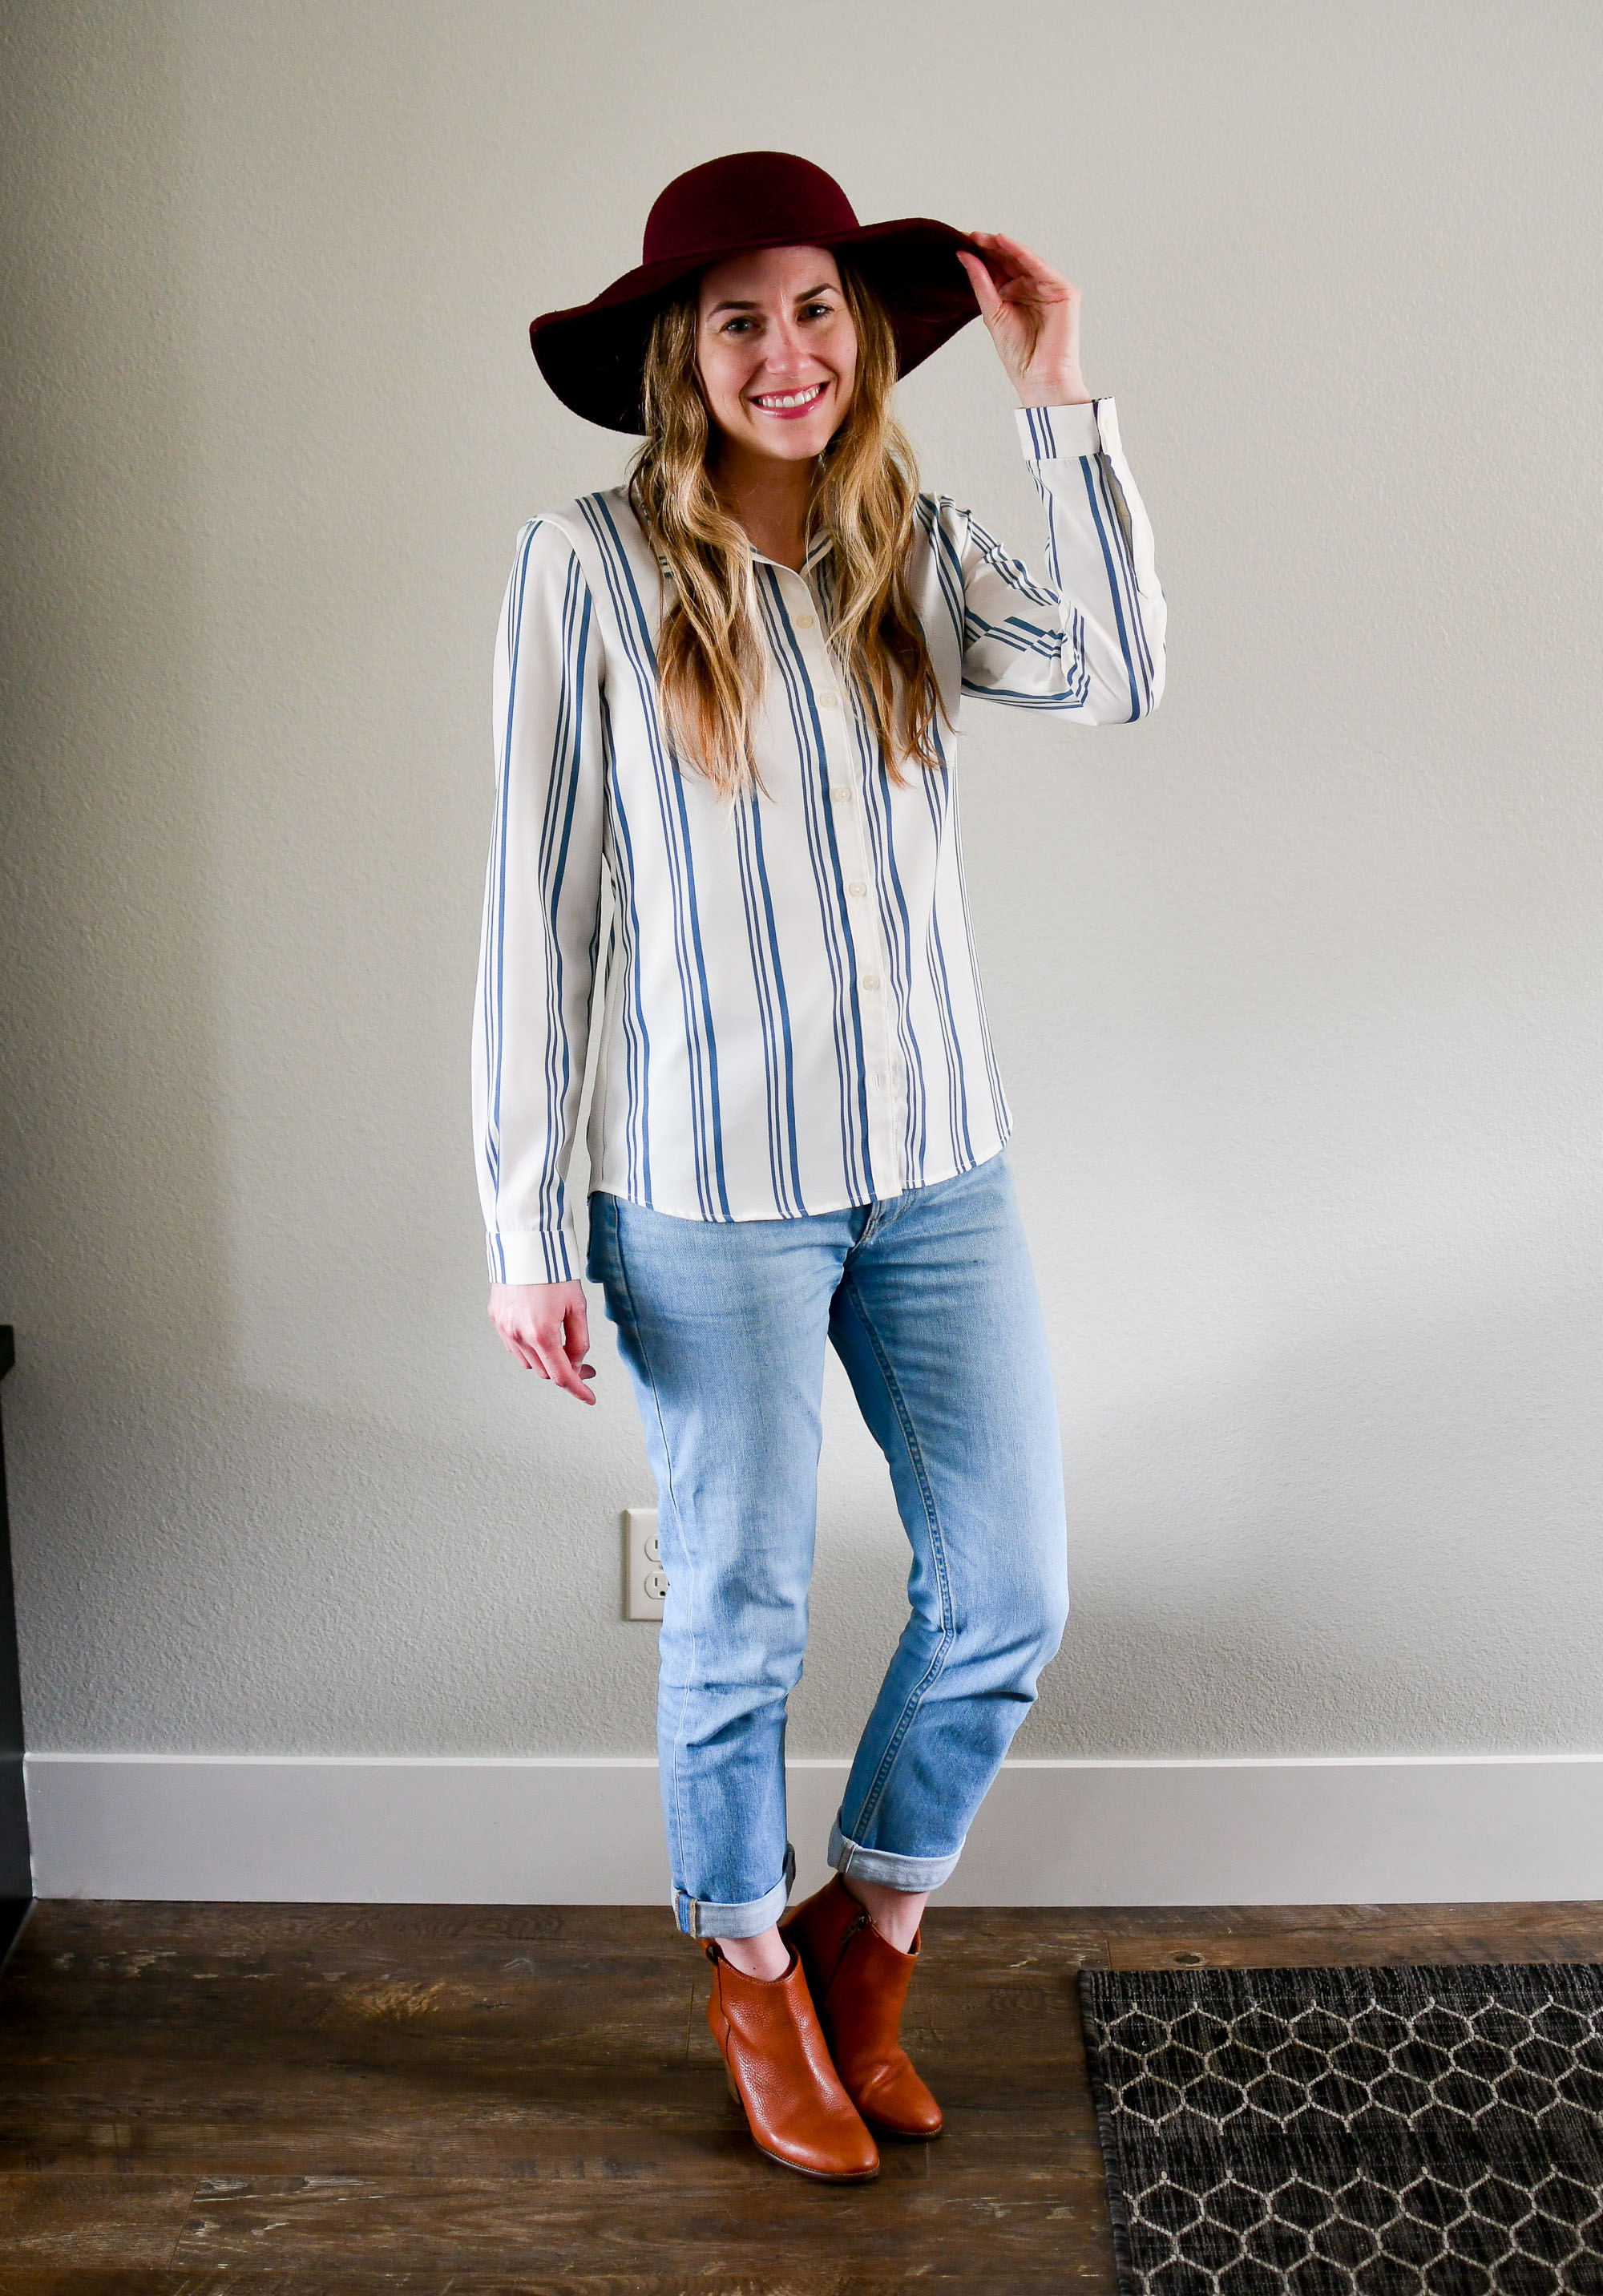 Striped shirt spring outfit with boyfriend jeans — Cotton Cashmere Cat Hair